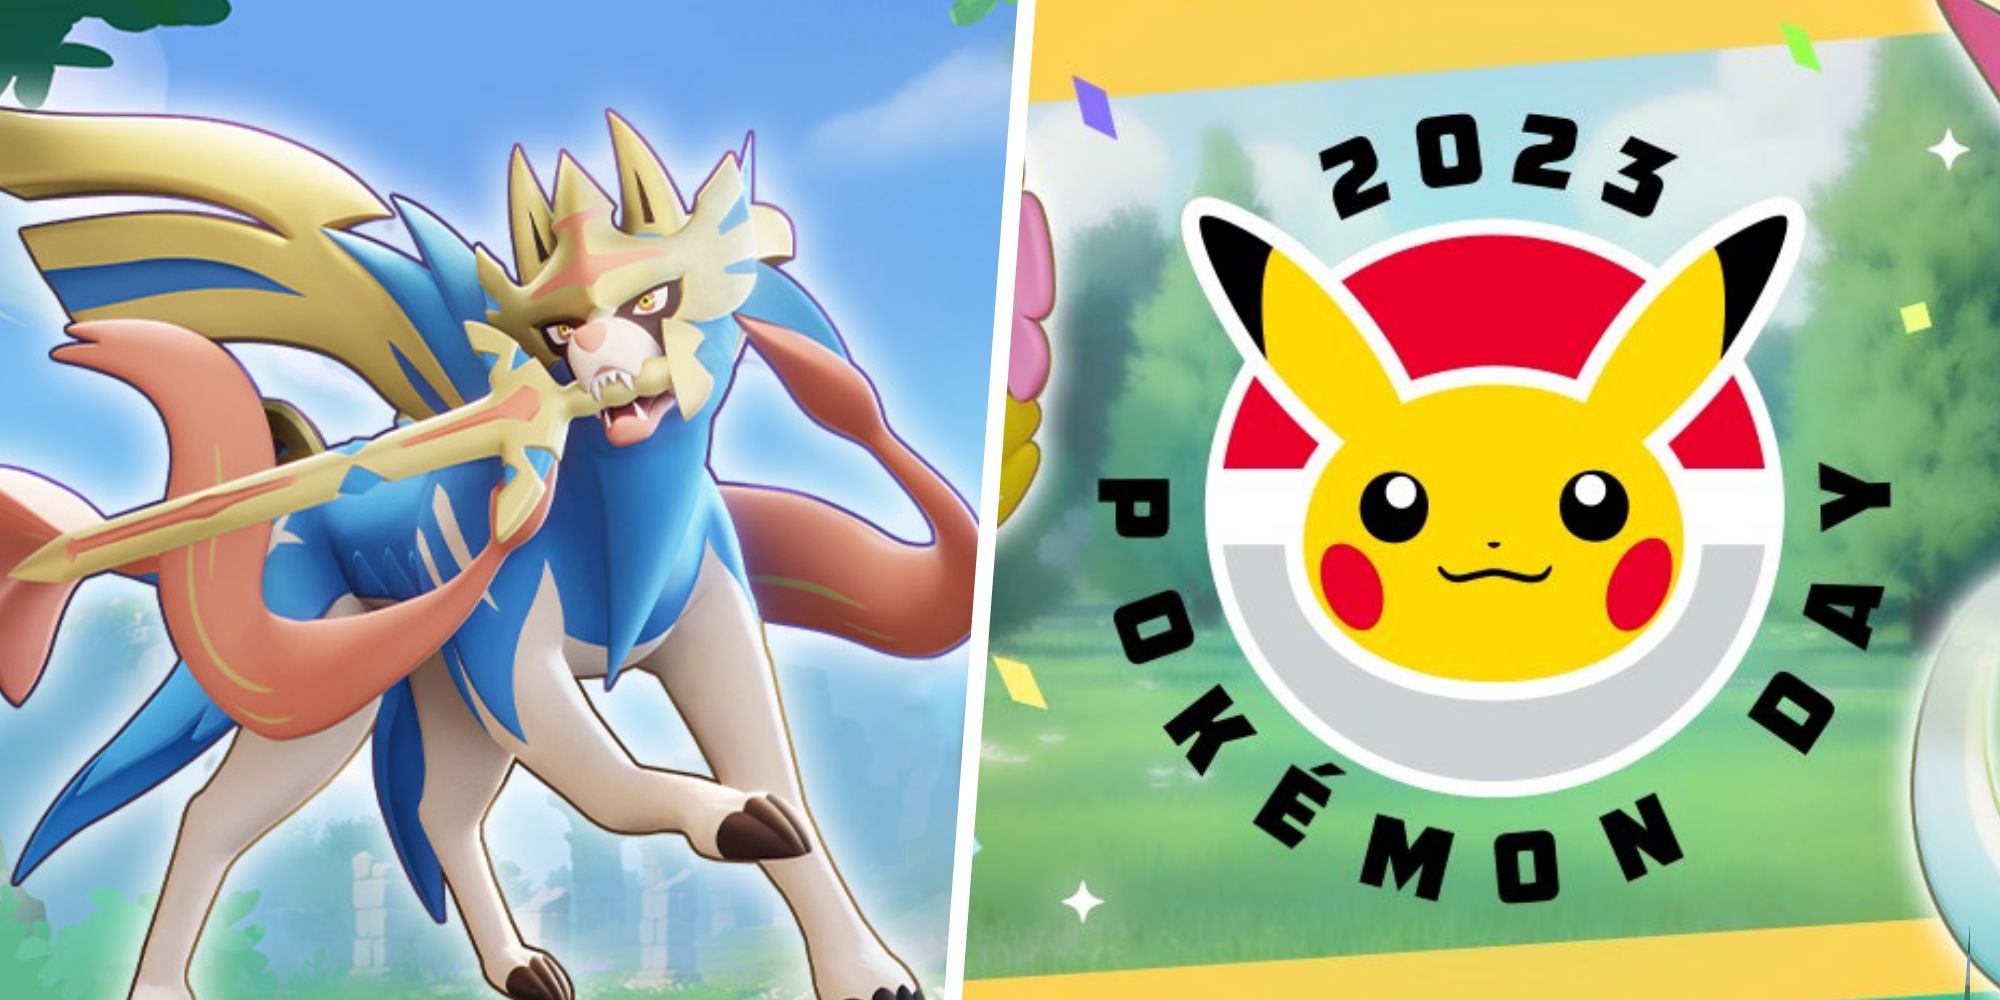 Pokémon UNITE on X: Trainers can complete missions in the Zacian's Weald  event to earn prizes, like a free Zacian UNITE License! #PokemonUNITE  #PokemonDay  / X